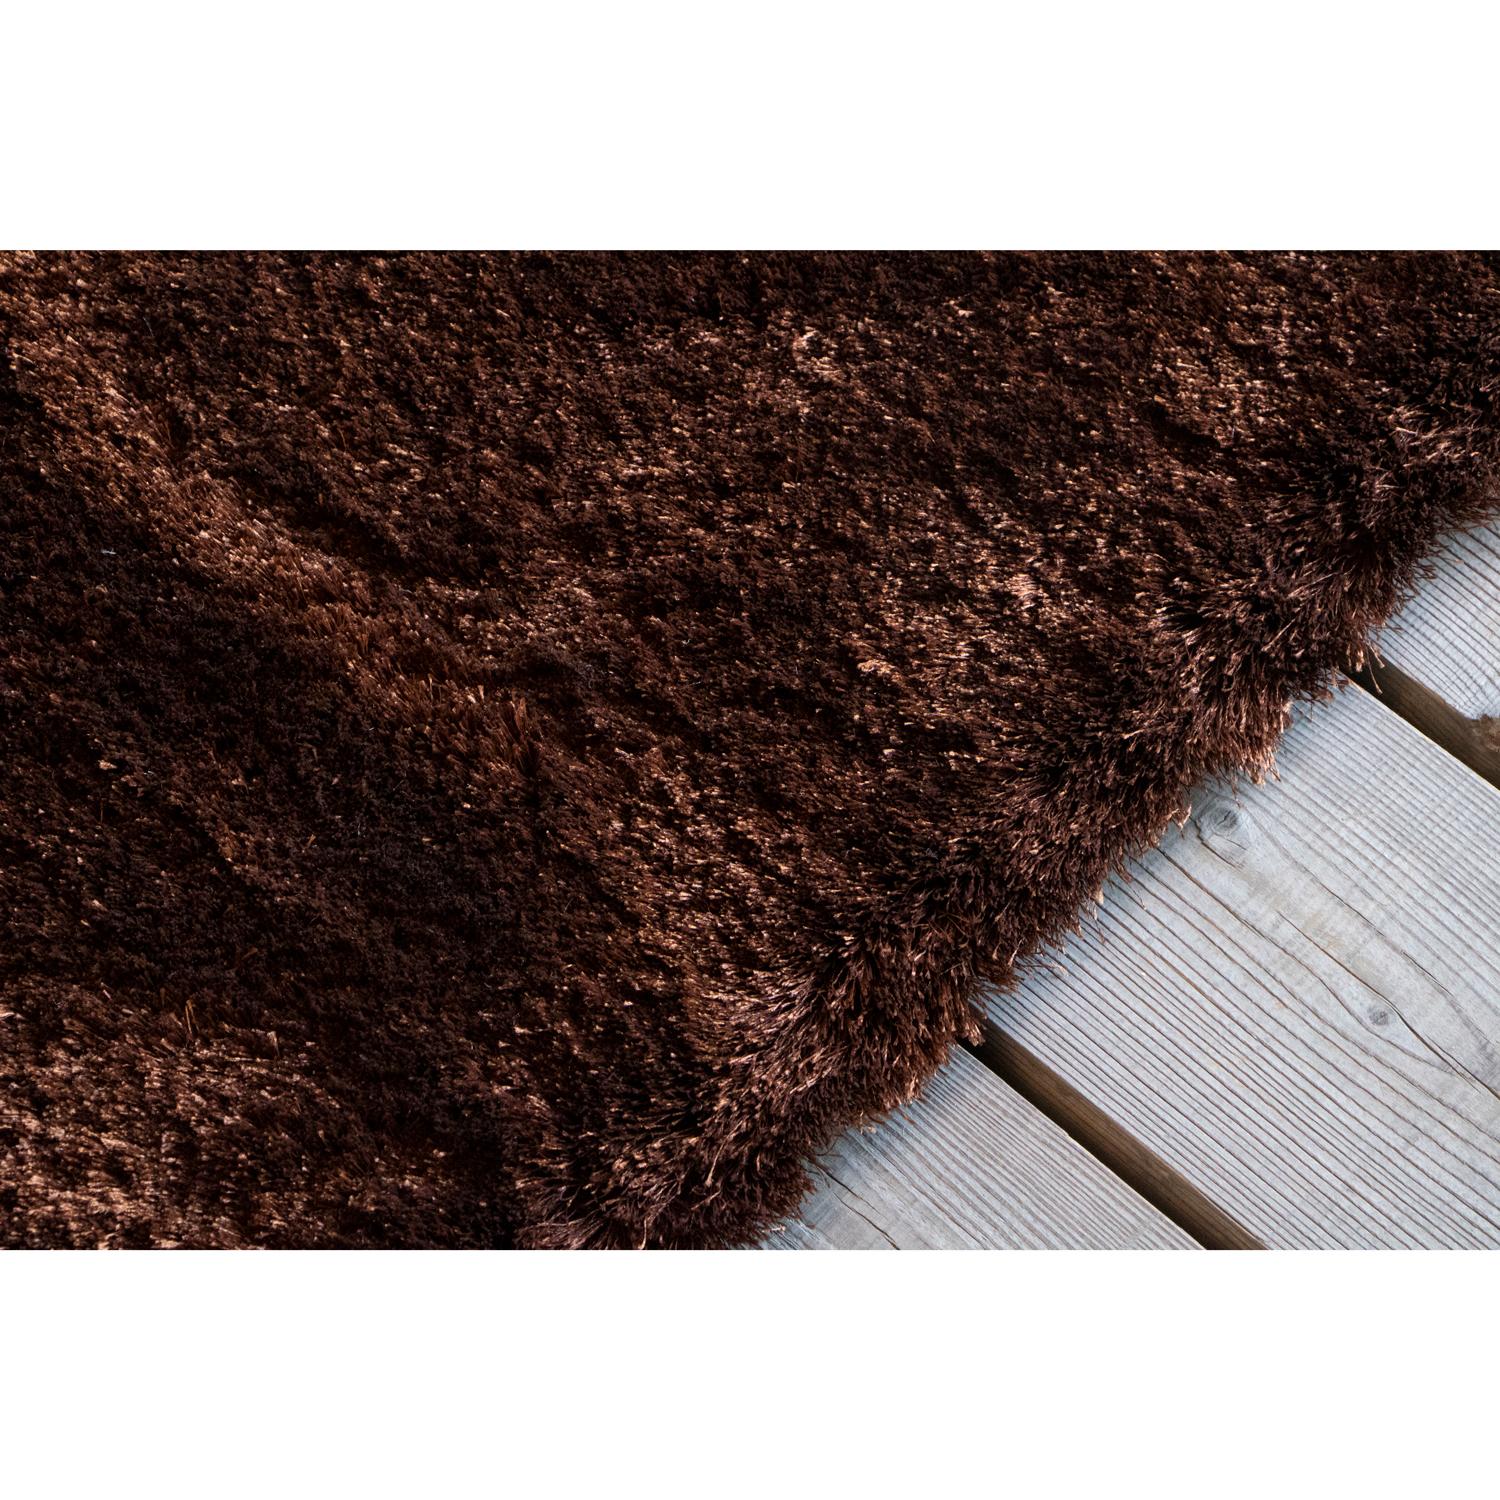 Indian Contemporary Soft Cozy Design Brown Rug by Deanna Comellini In Stock 200x300 cm For Sale